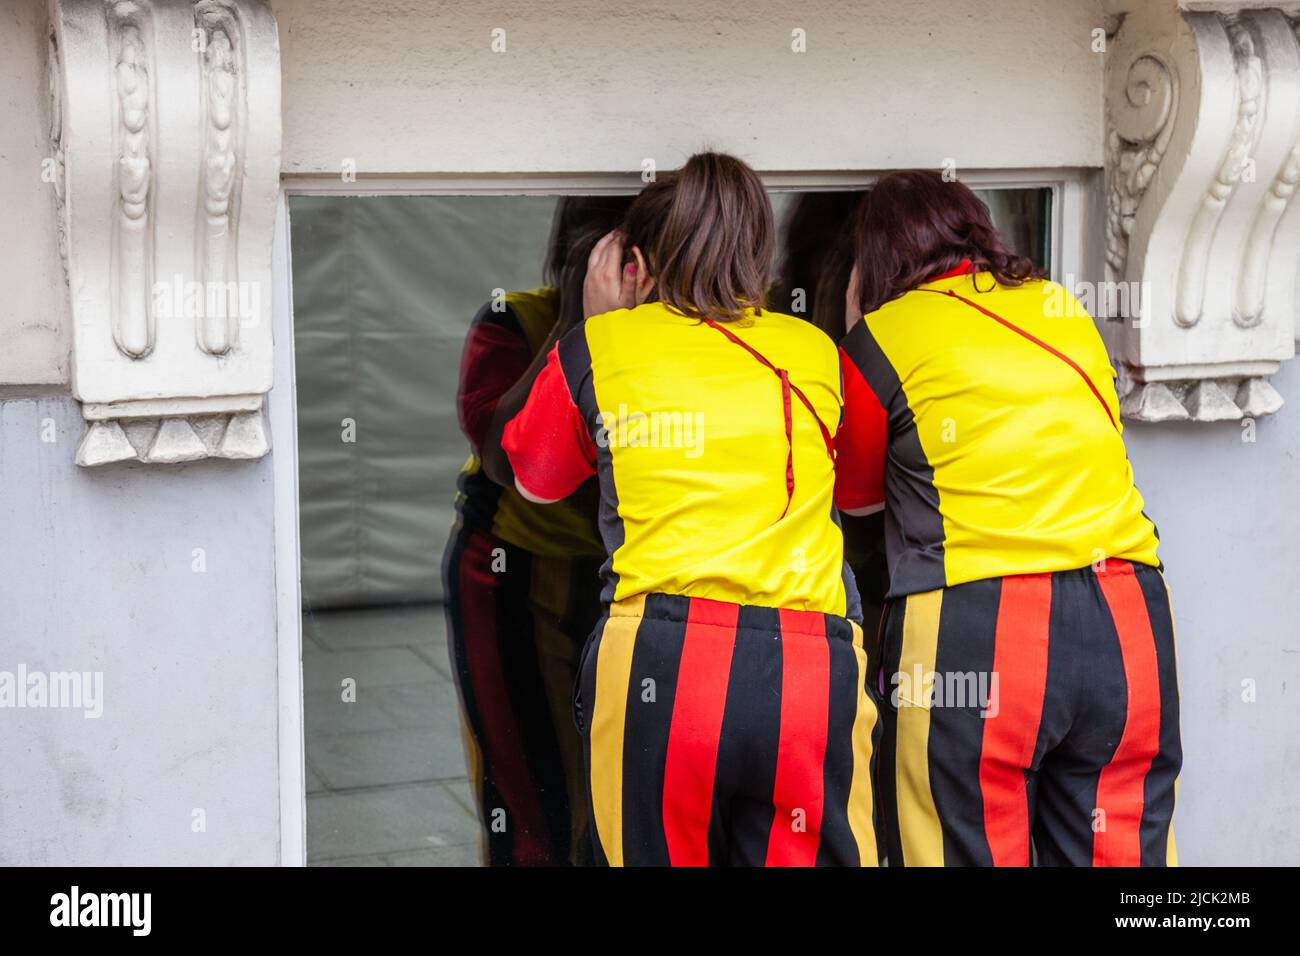 Two women, wearing a costume reminiscent of the colors of Belgium, trying to observe the interior of a building through a window. Brussels. Stock Photo